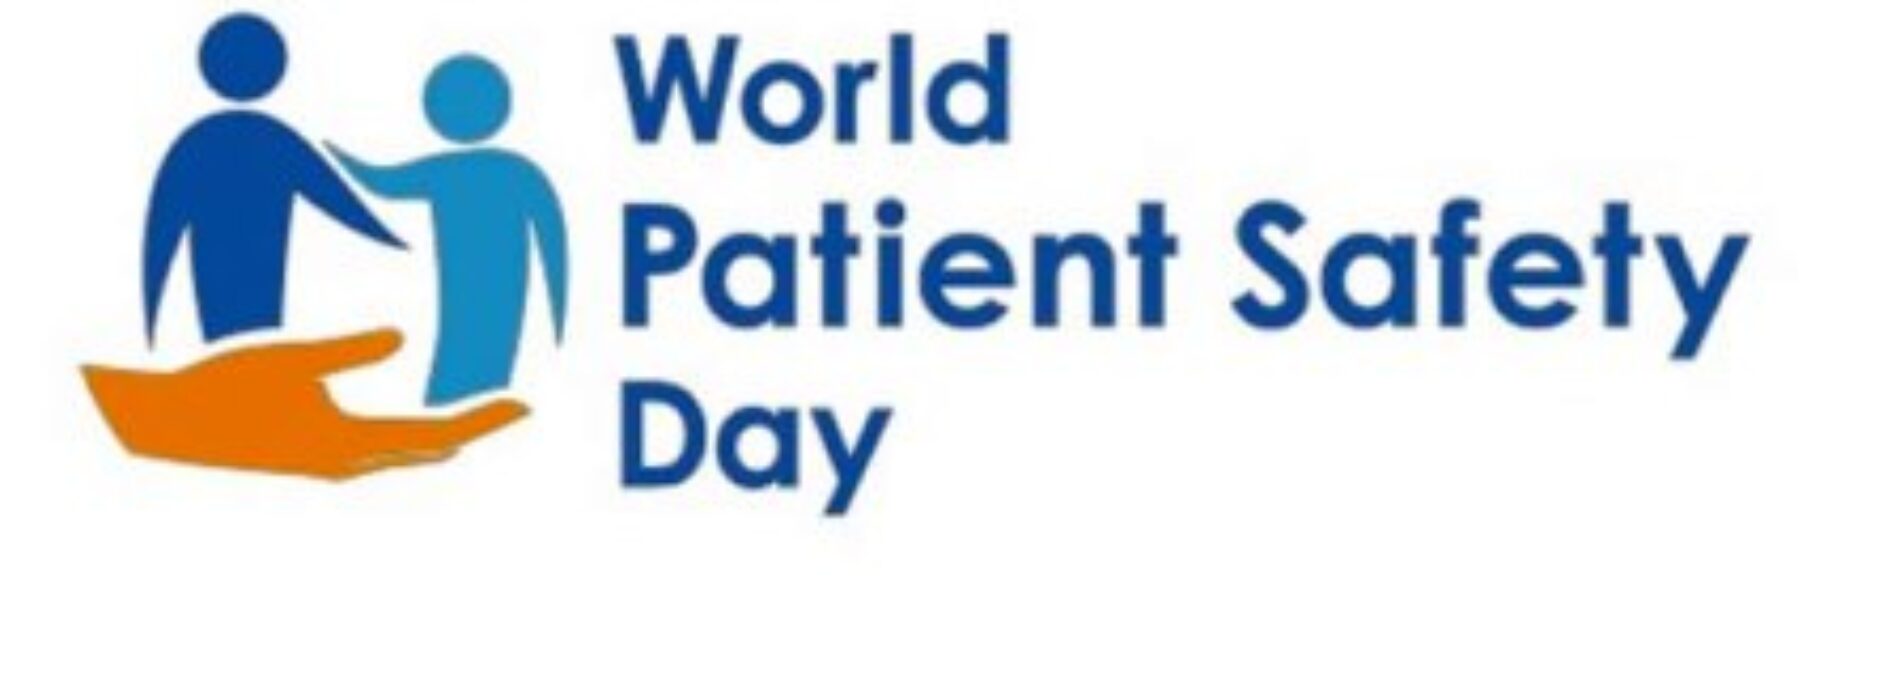 Health workers abandon patients on World Patients Safety Day